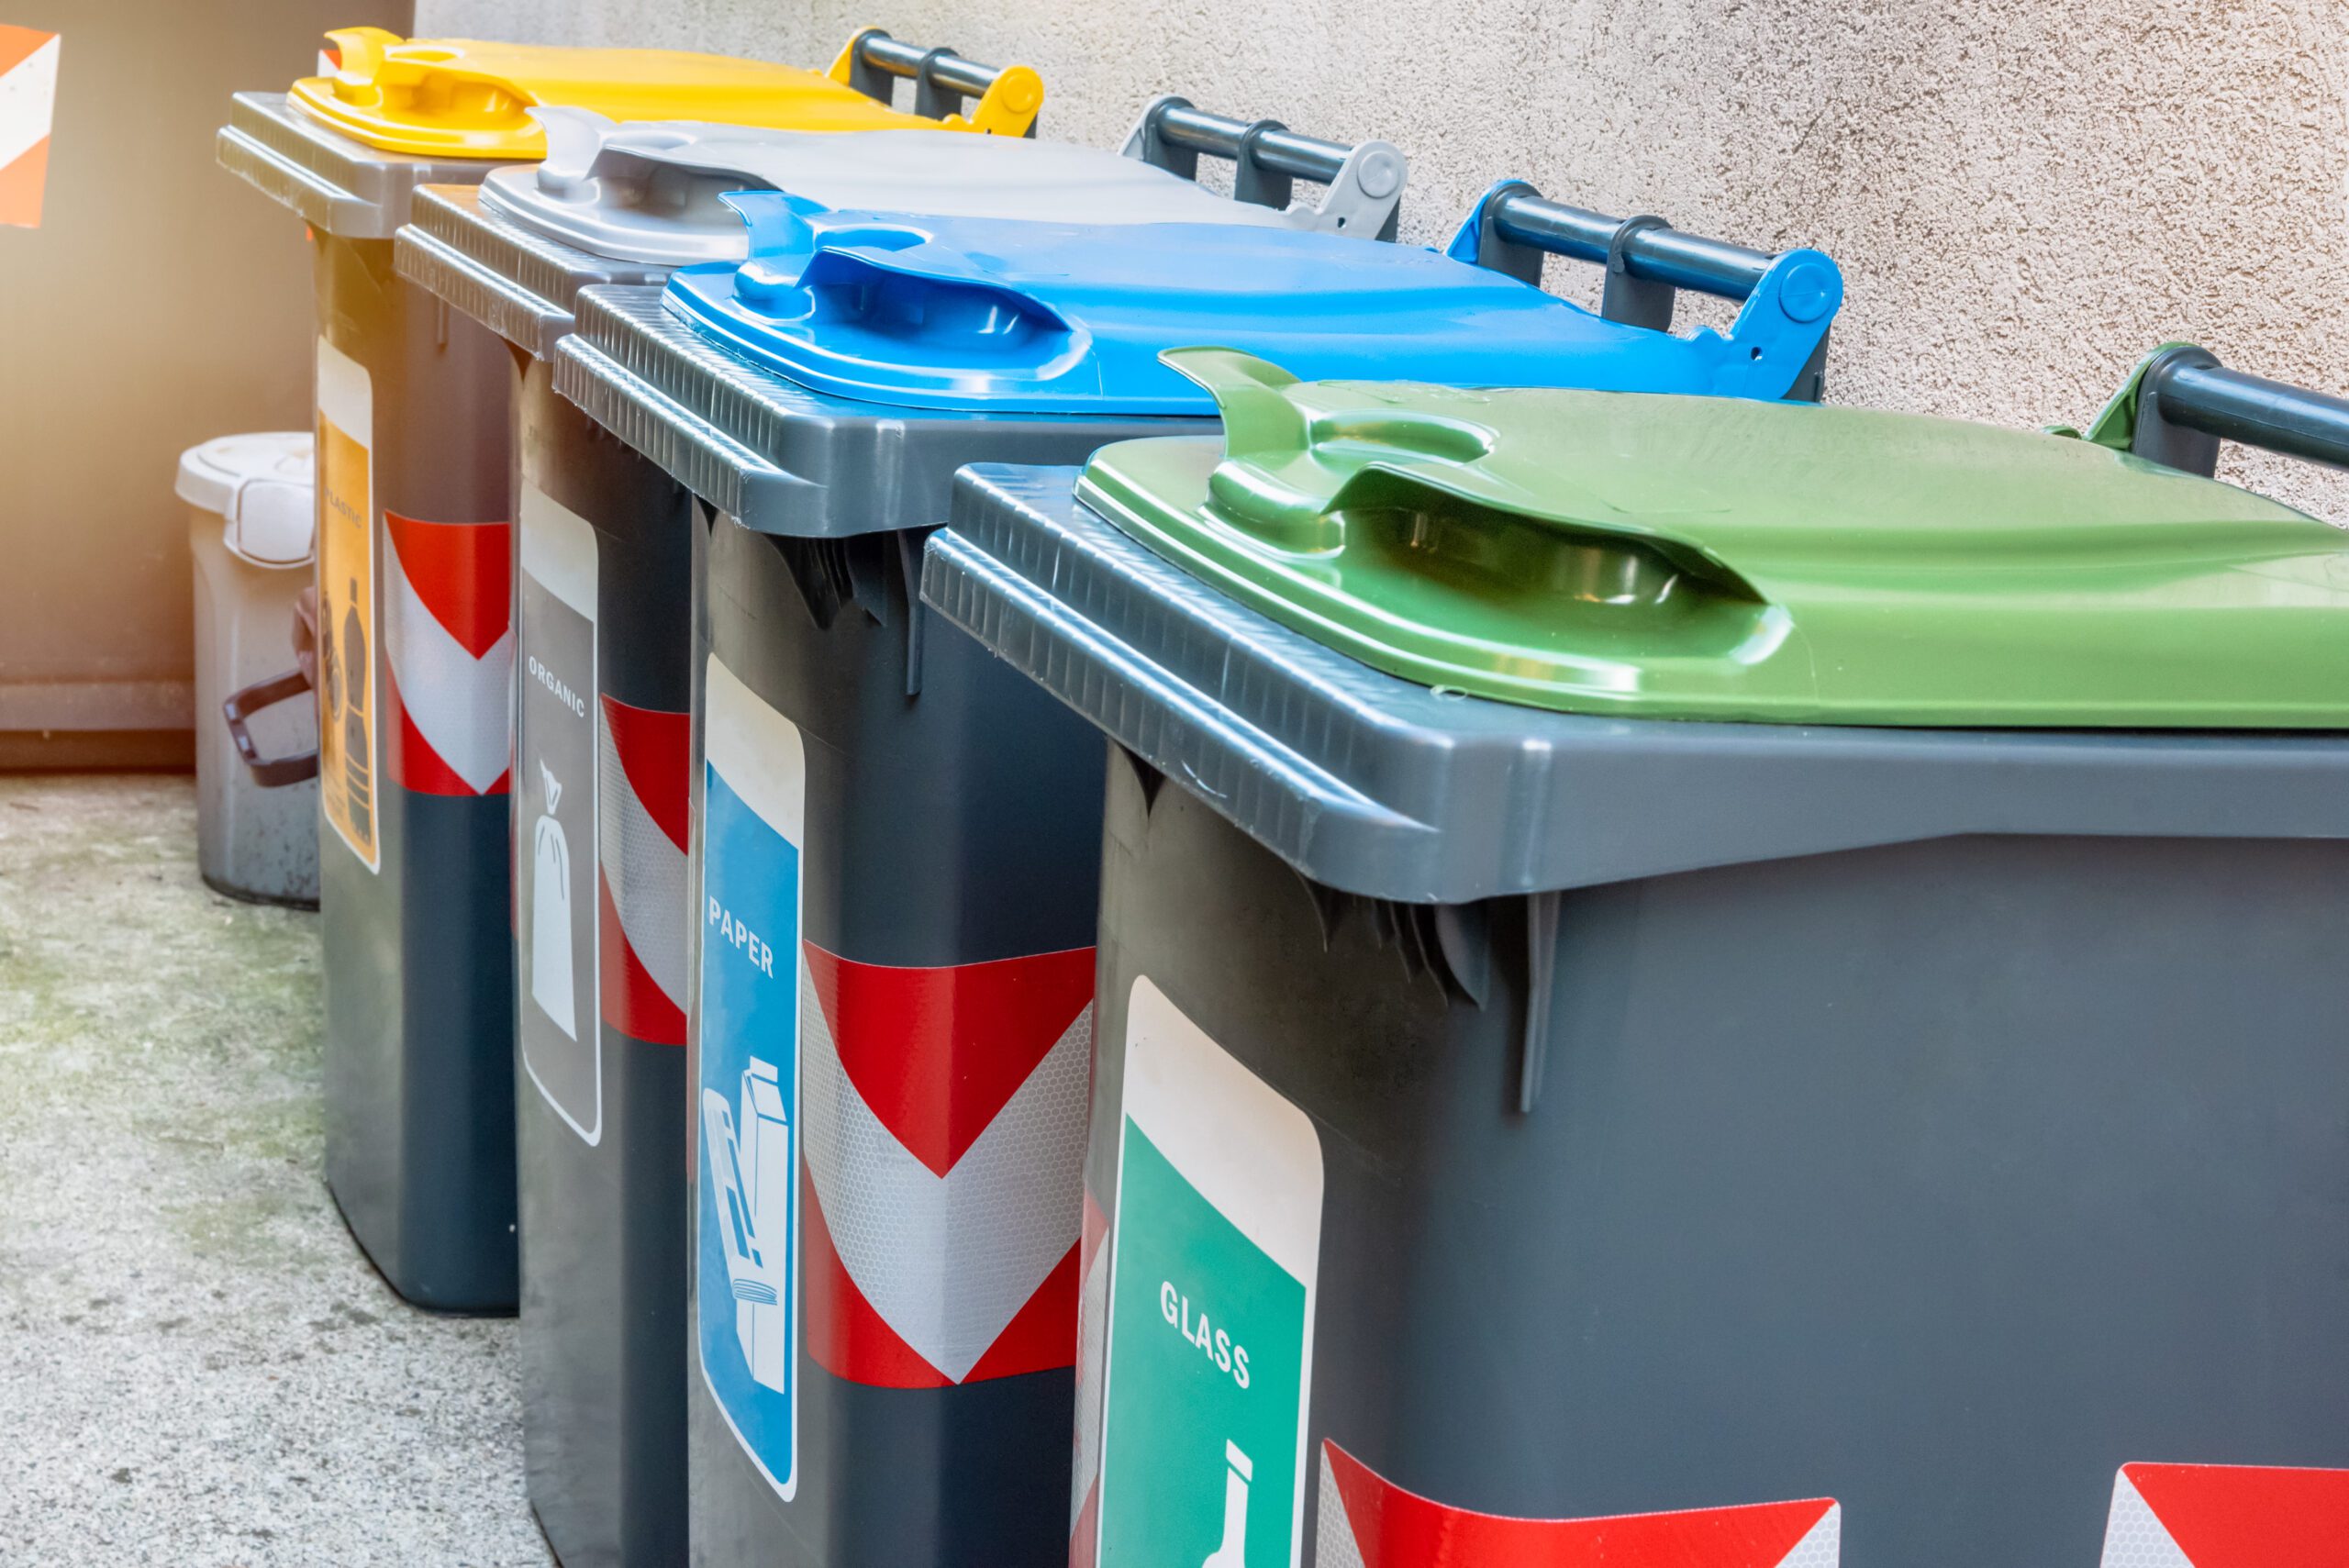 Amazing Recycling Facts You Probably Don’t Know